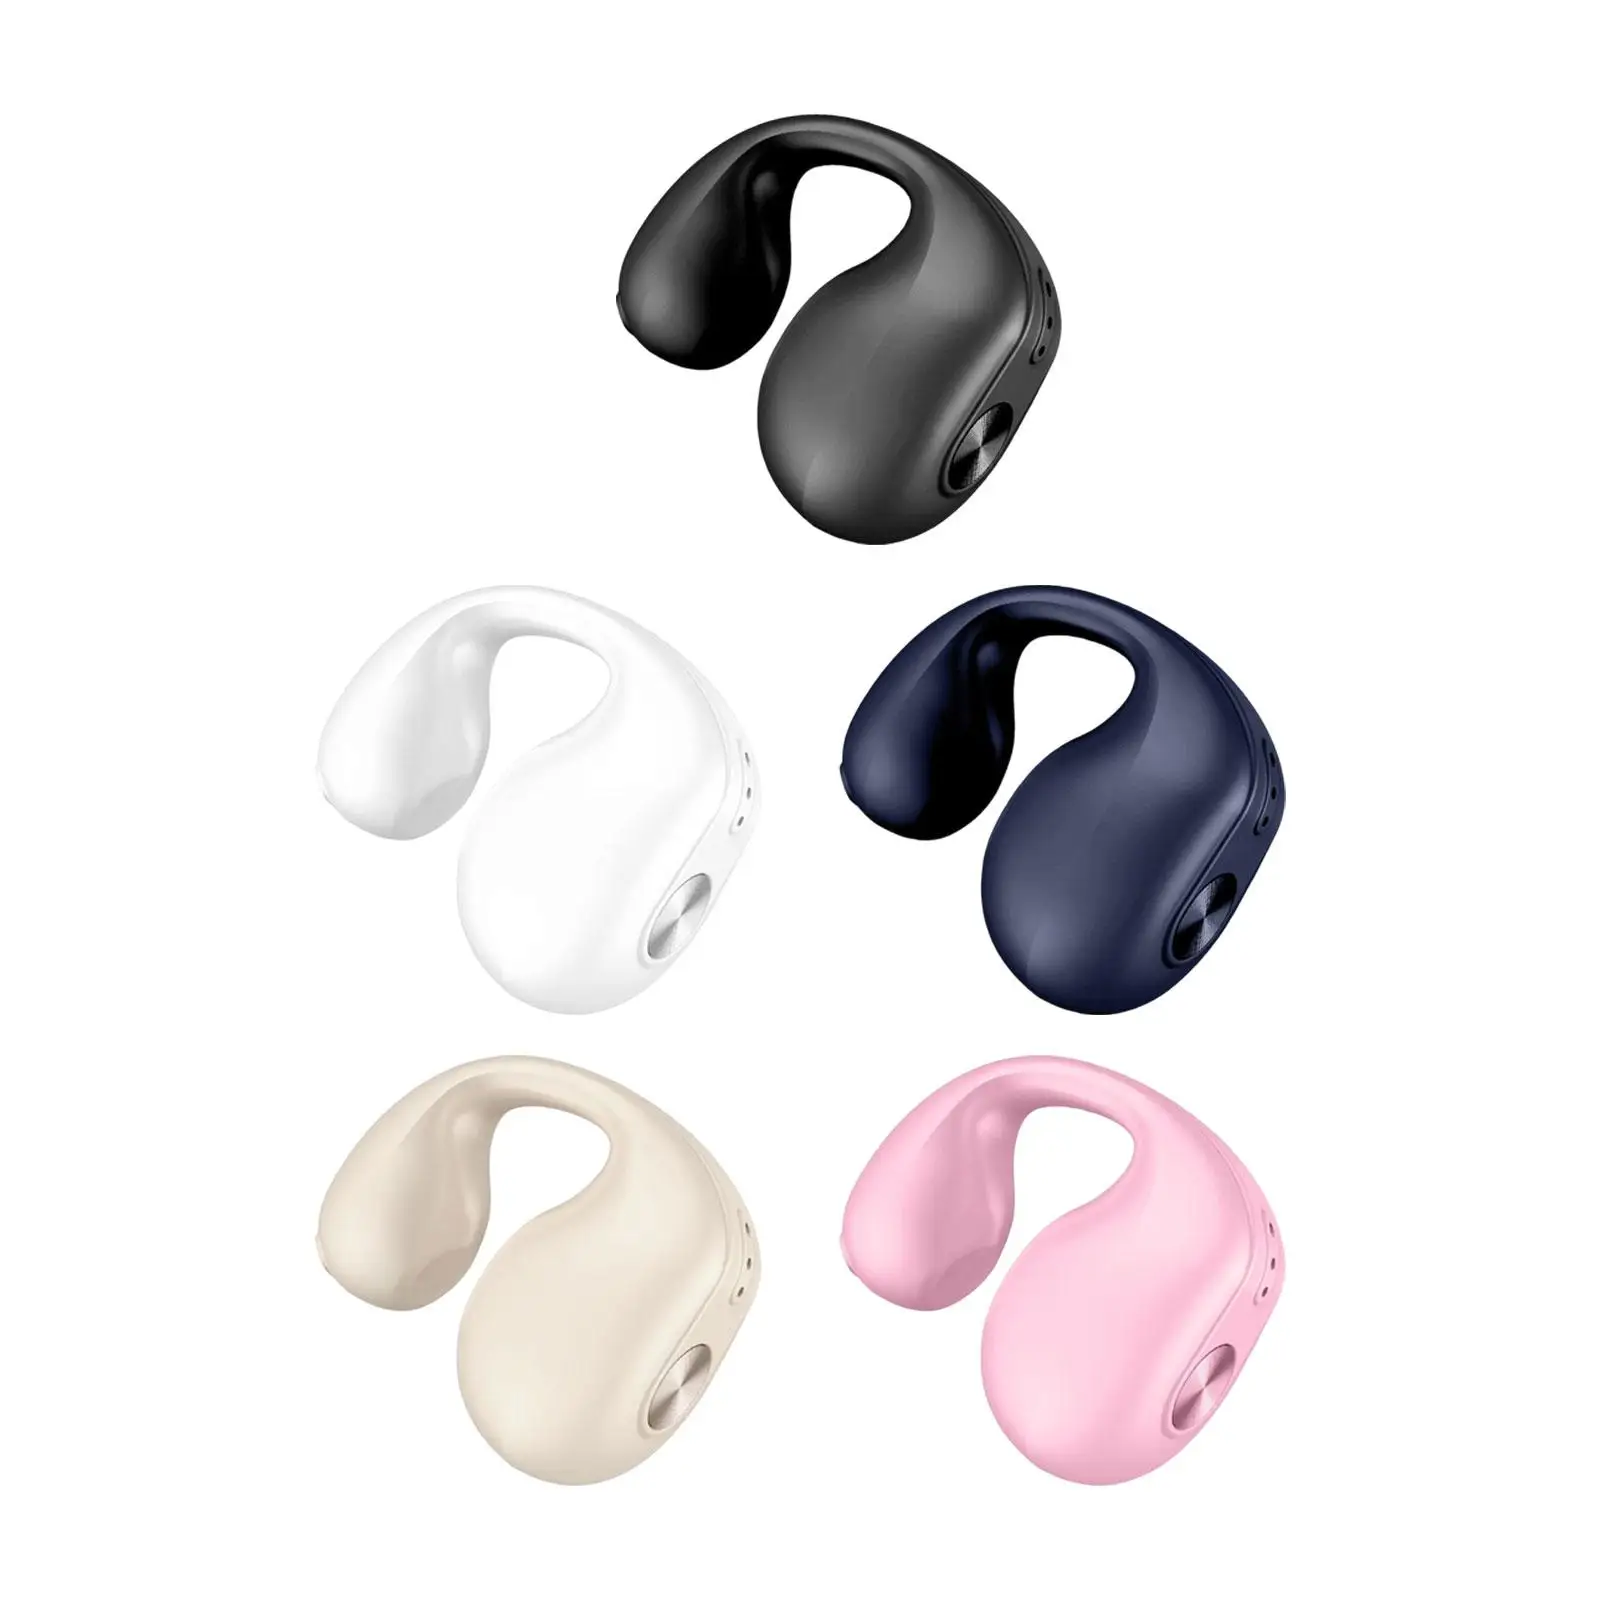 1PC Ear Clip Wireless Headset Portable Noise Reduction Hands Free Earbud HiFi Sound Low Latency Earphones for Running Driving